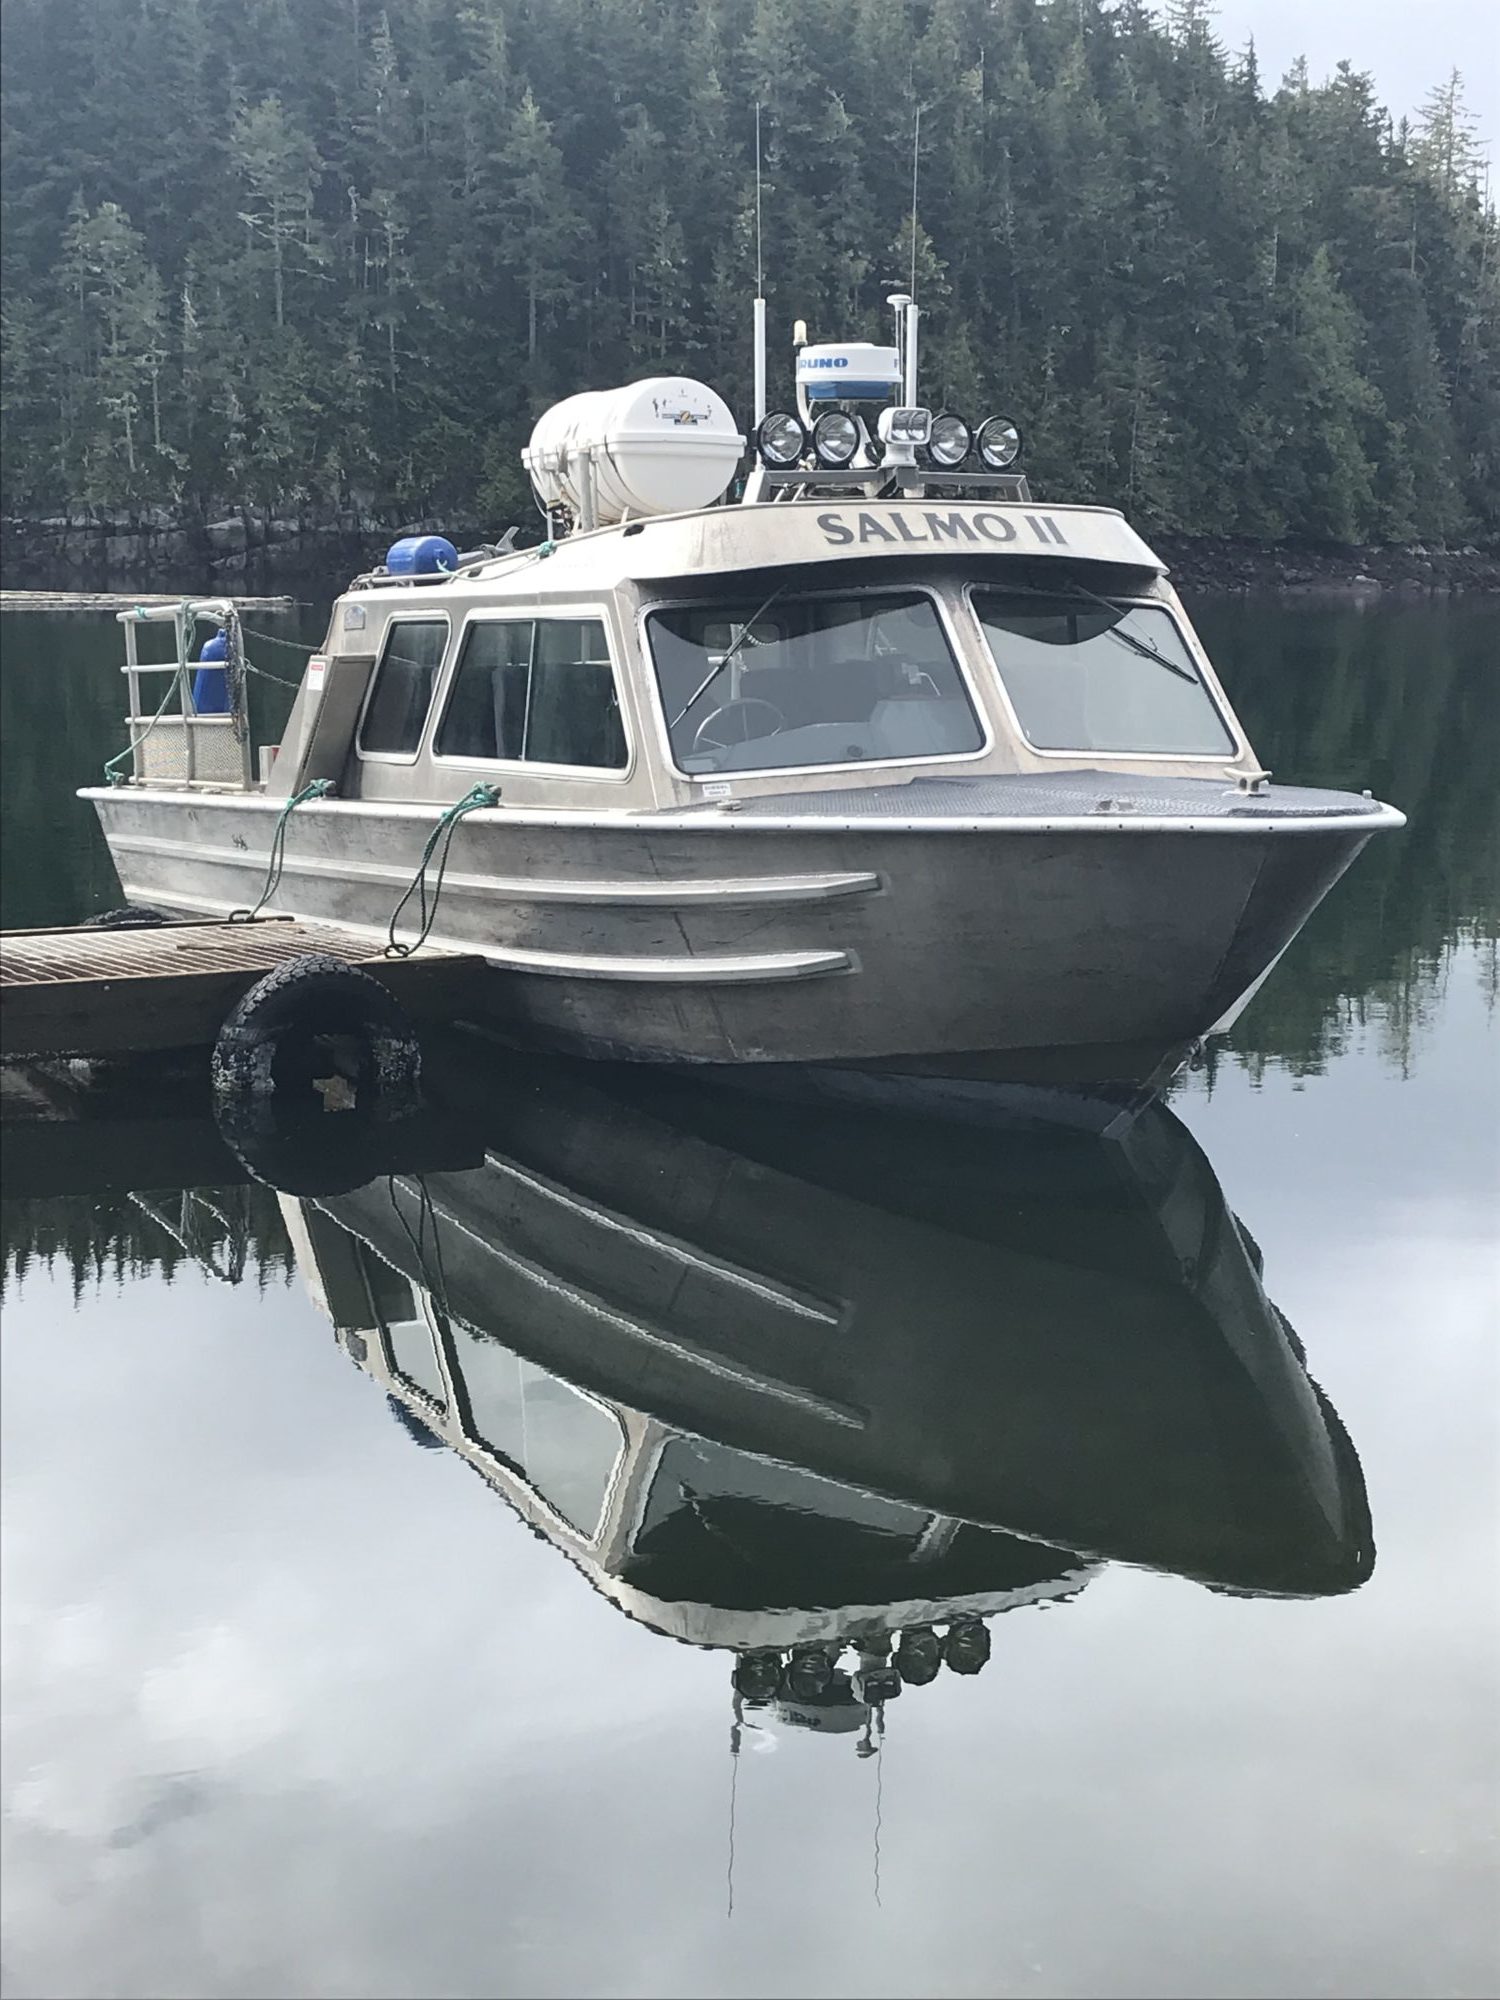 Vancouver Island Water Taxi